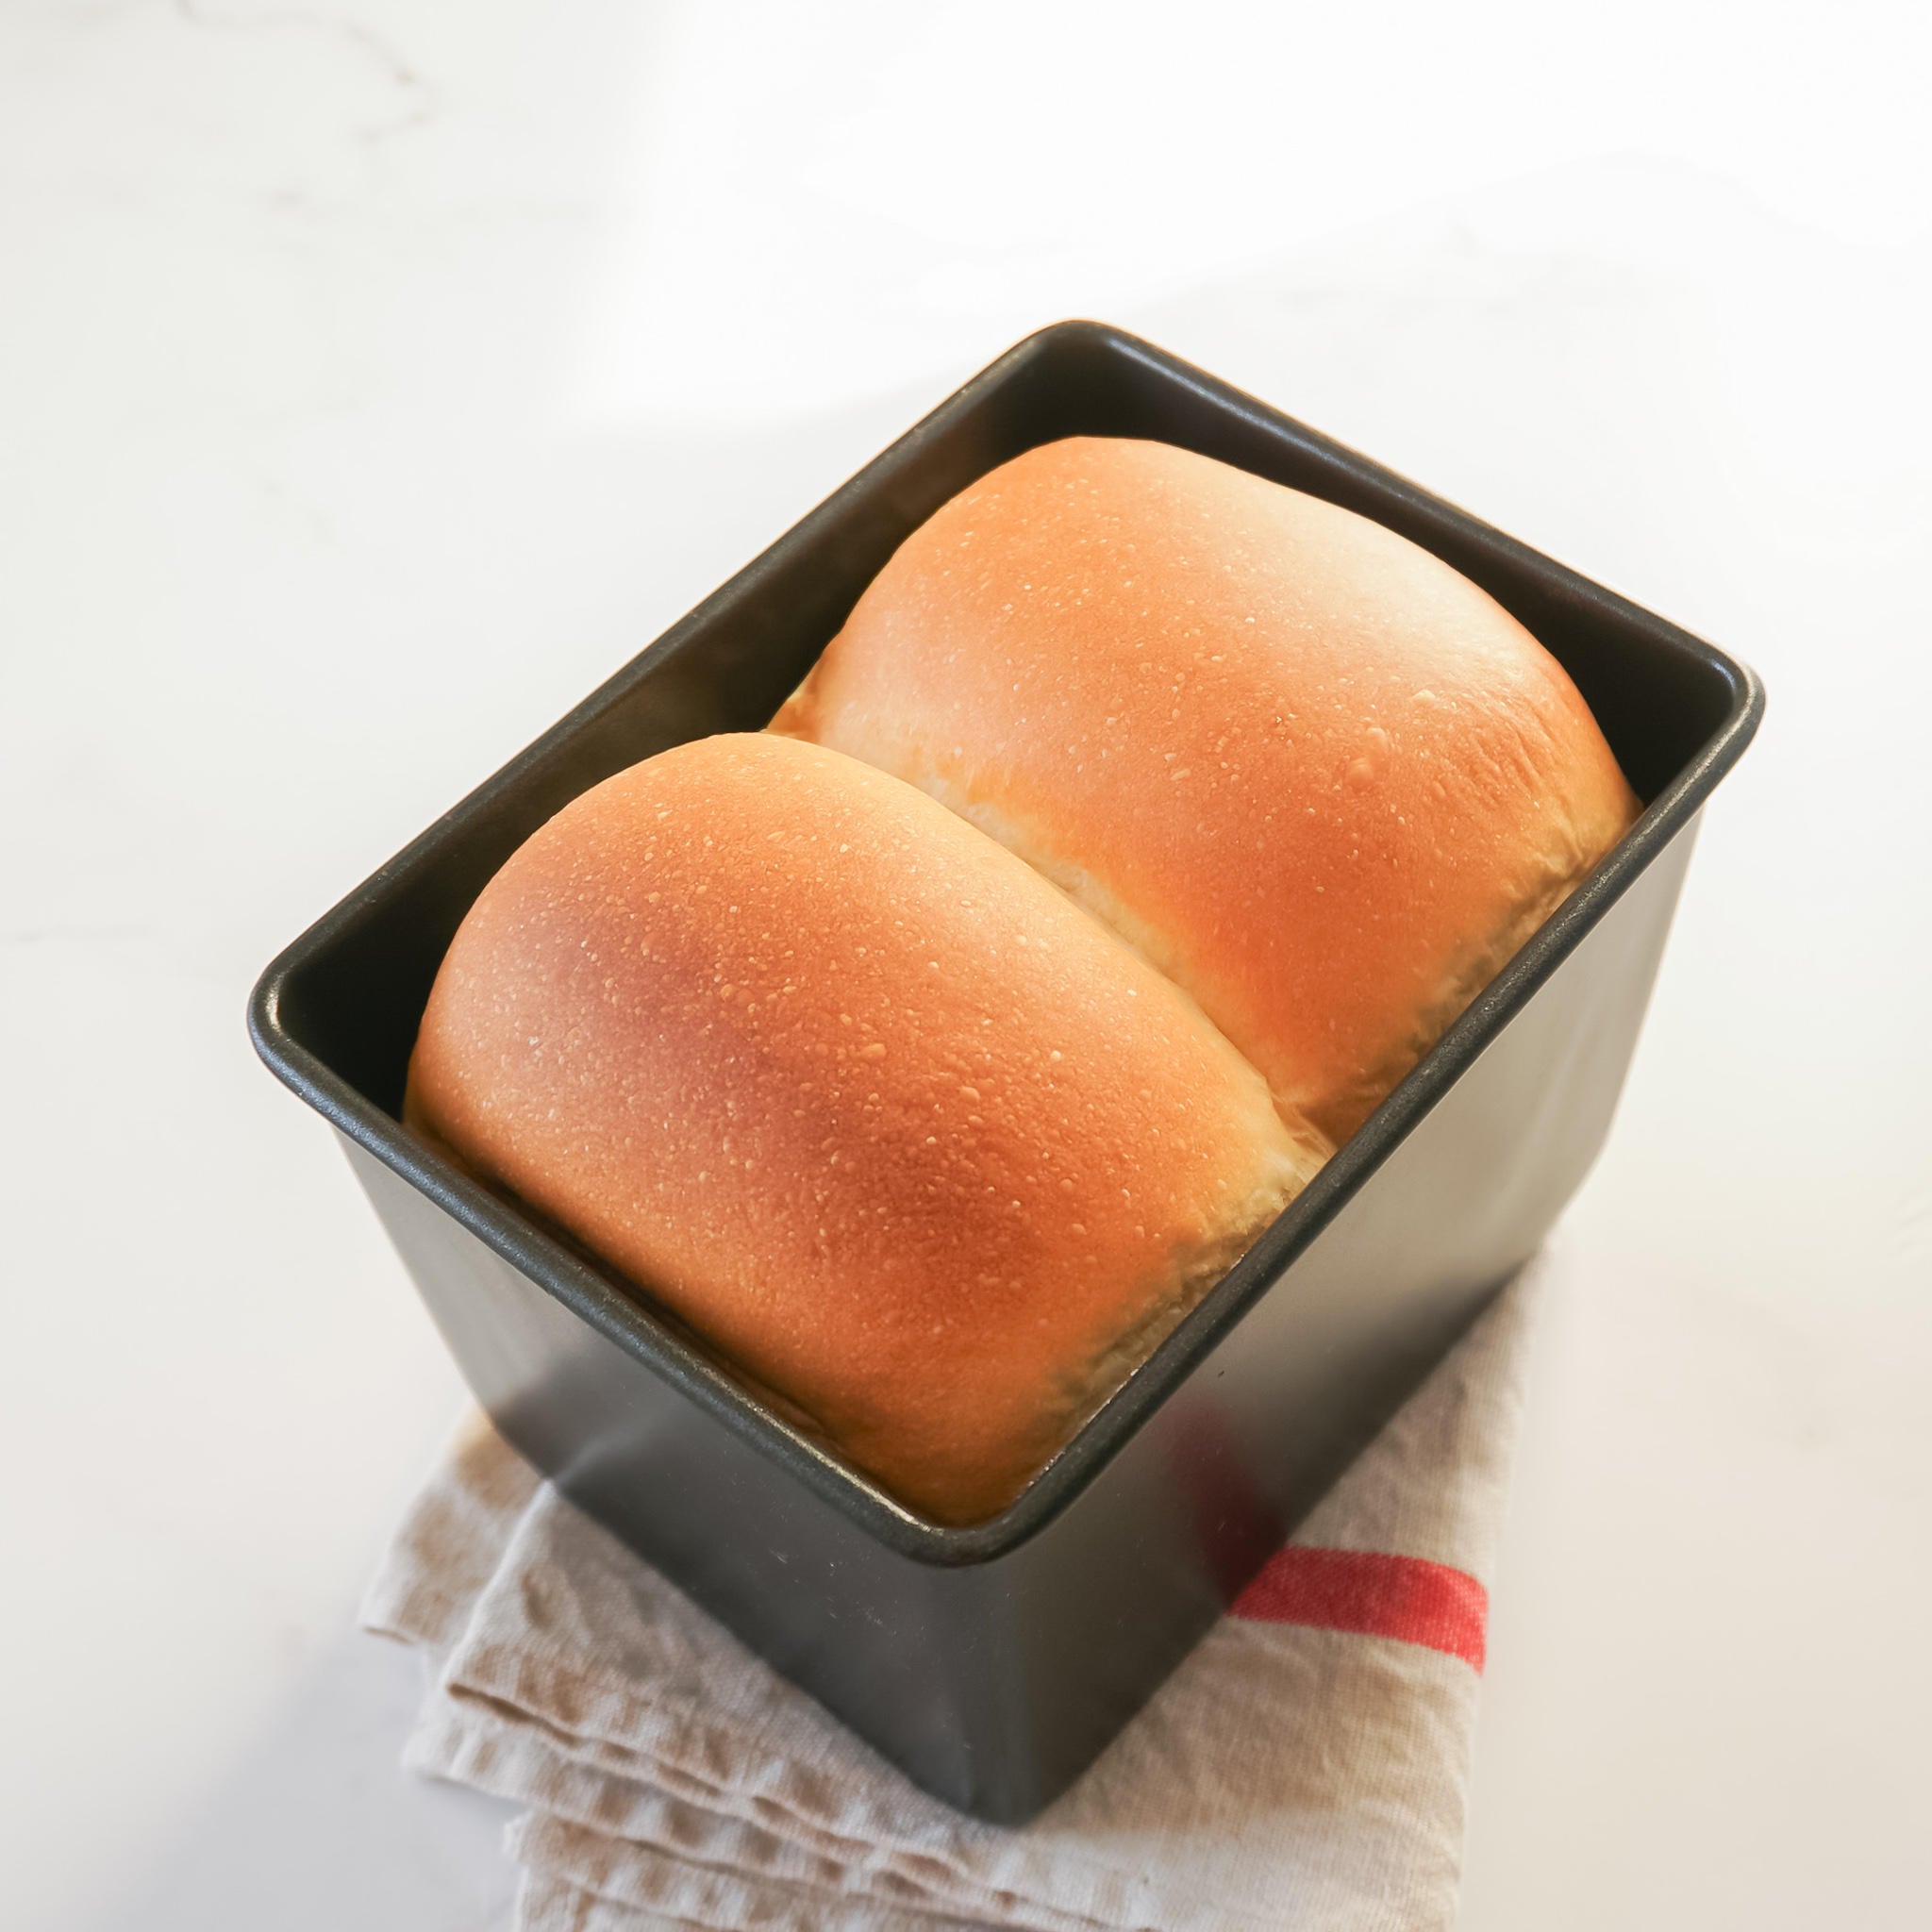 Bread Loaf Pan - Small